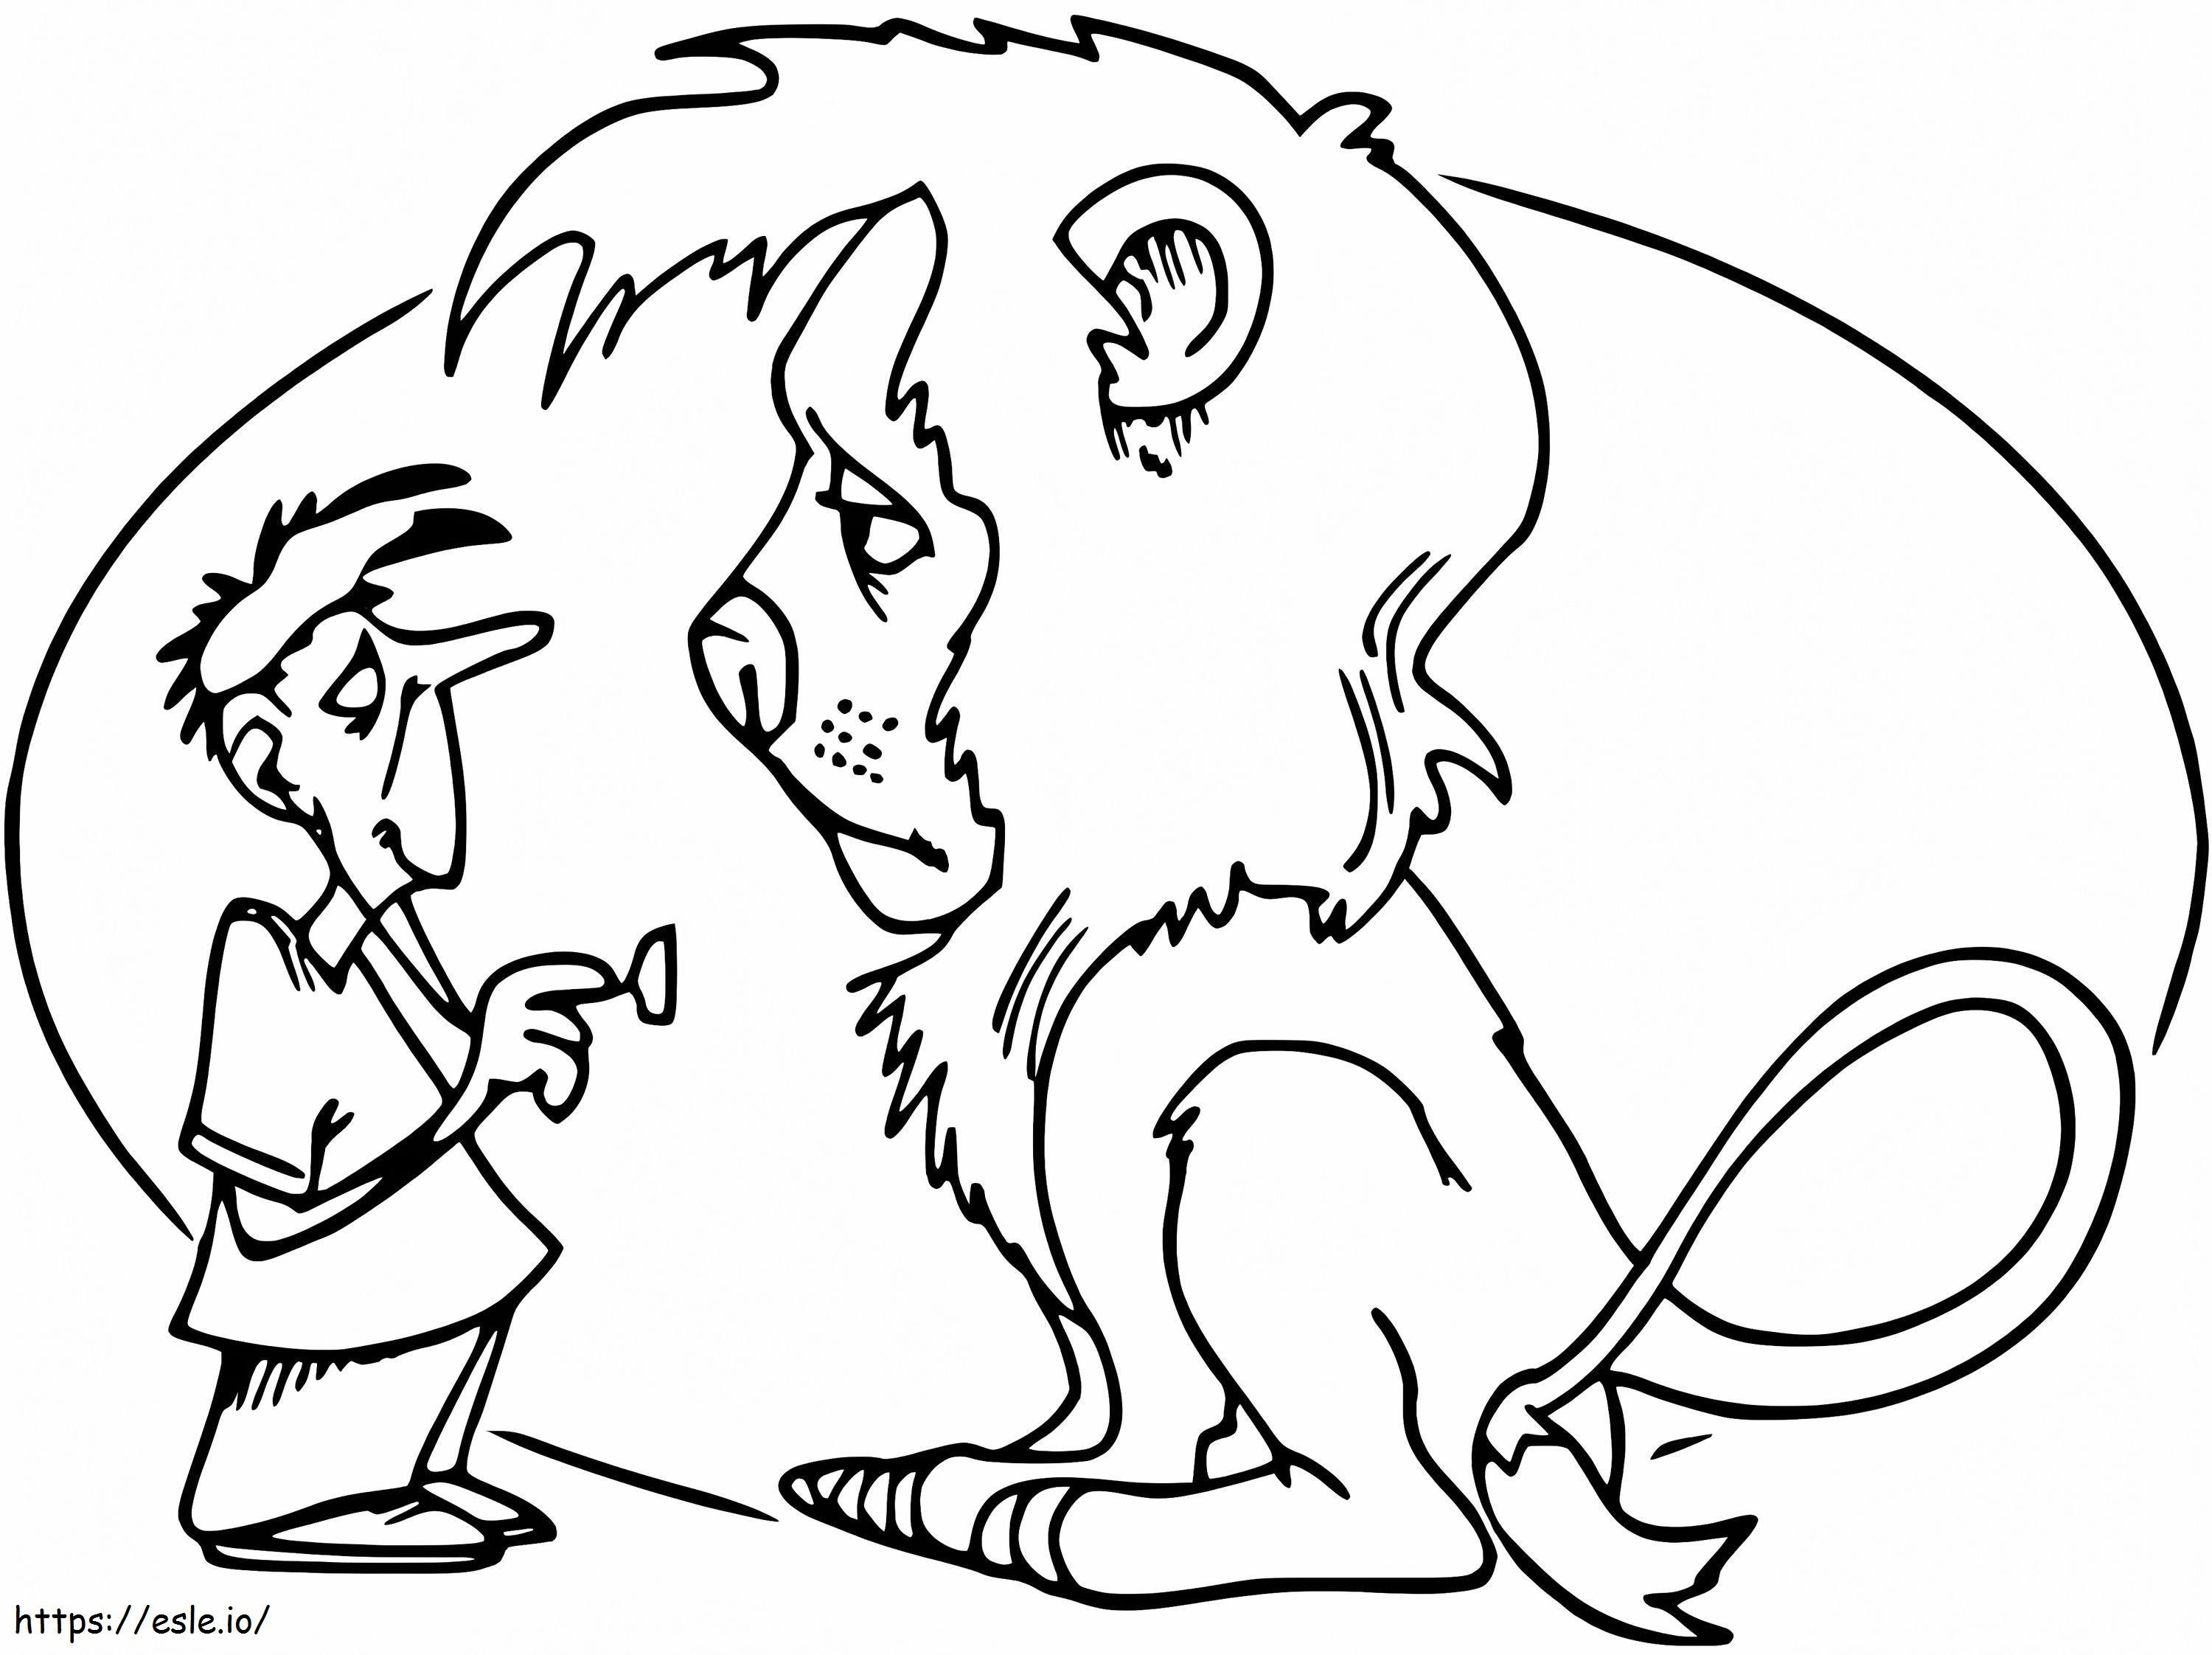 Veterinarian And Sad Lion coloring page